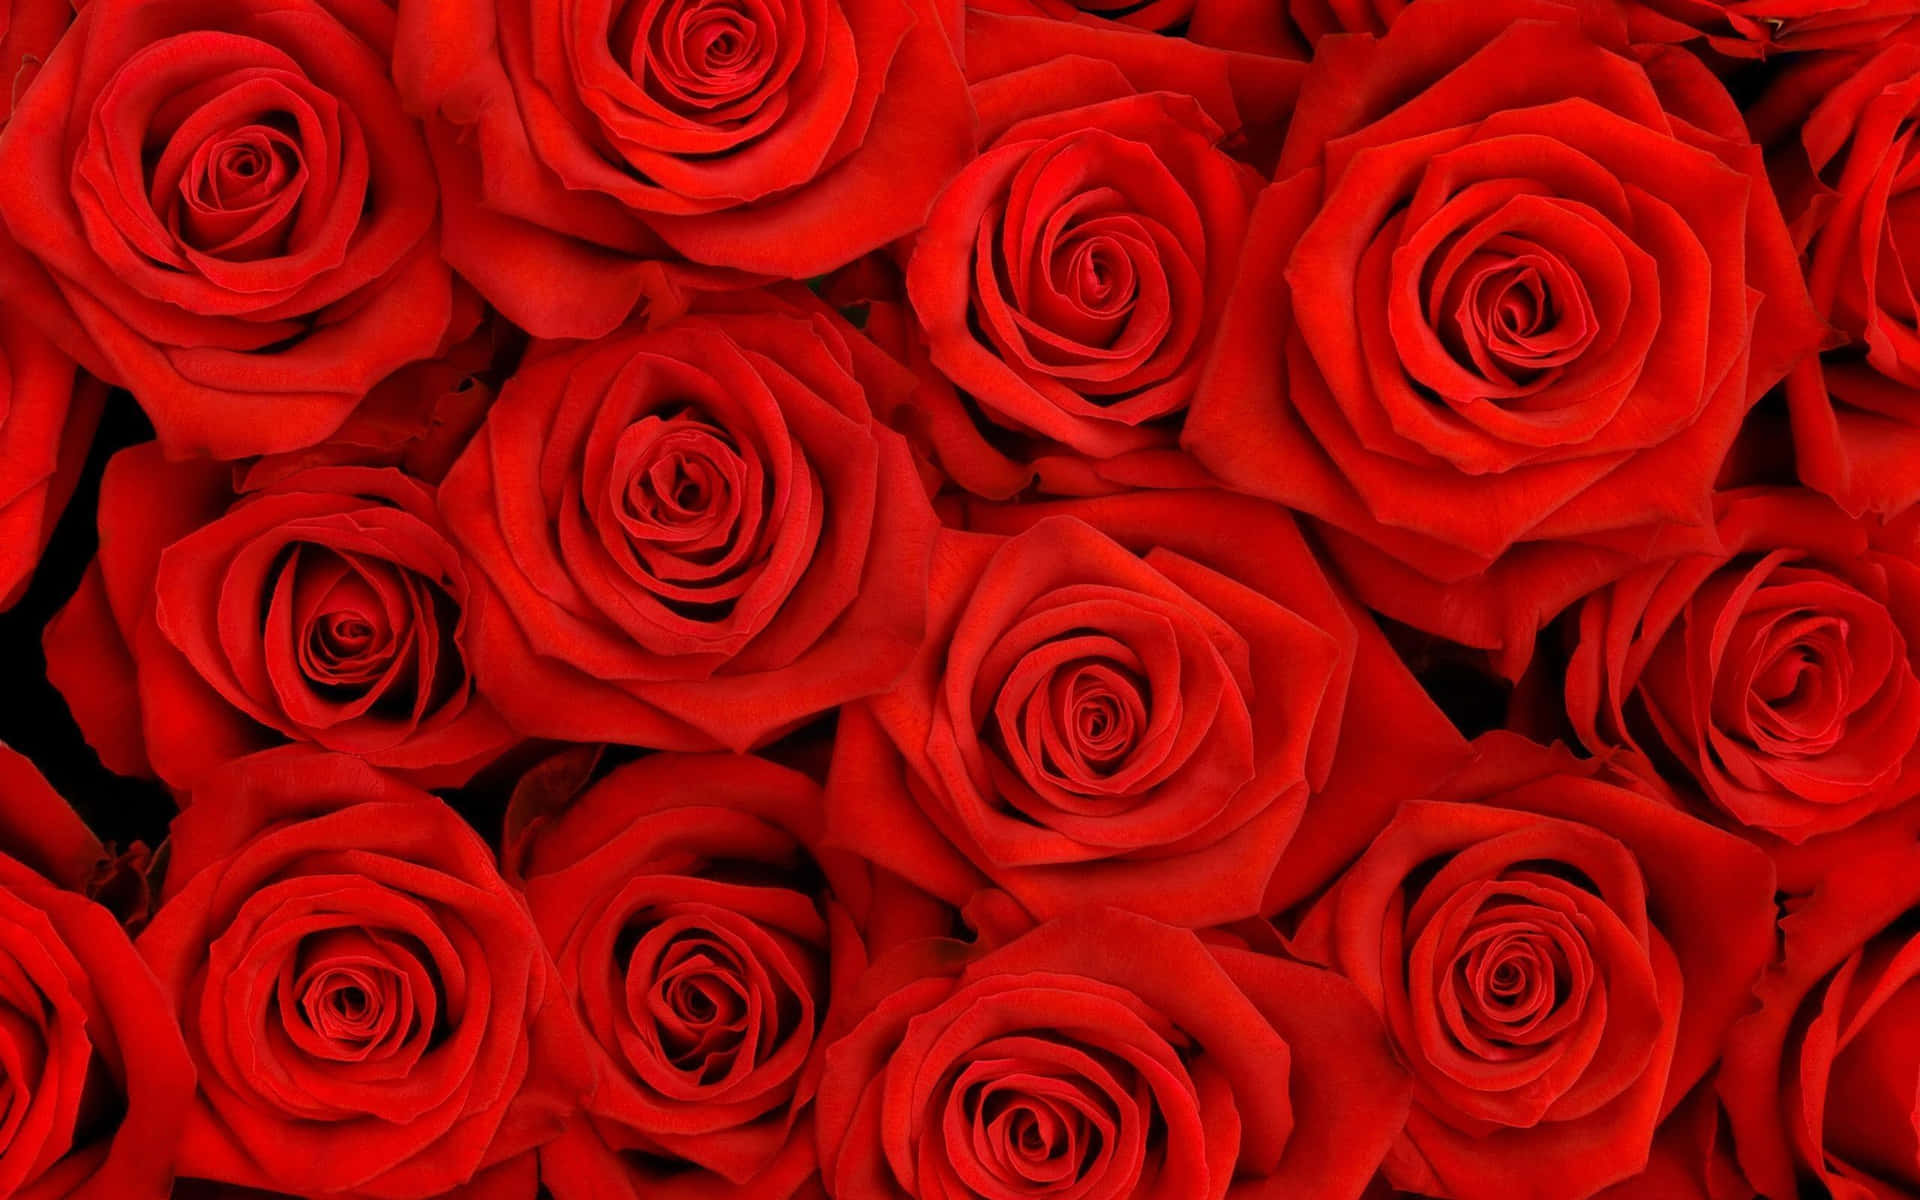 Red Rose Aesthetic - Beauty In Nature Wallpaper